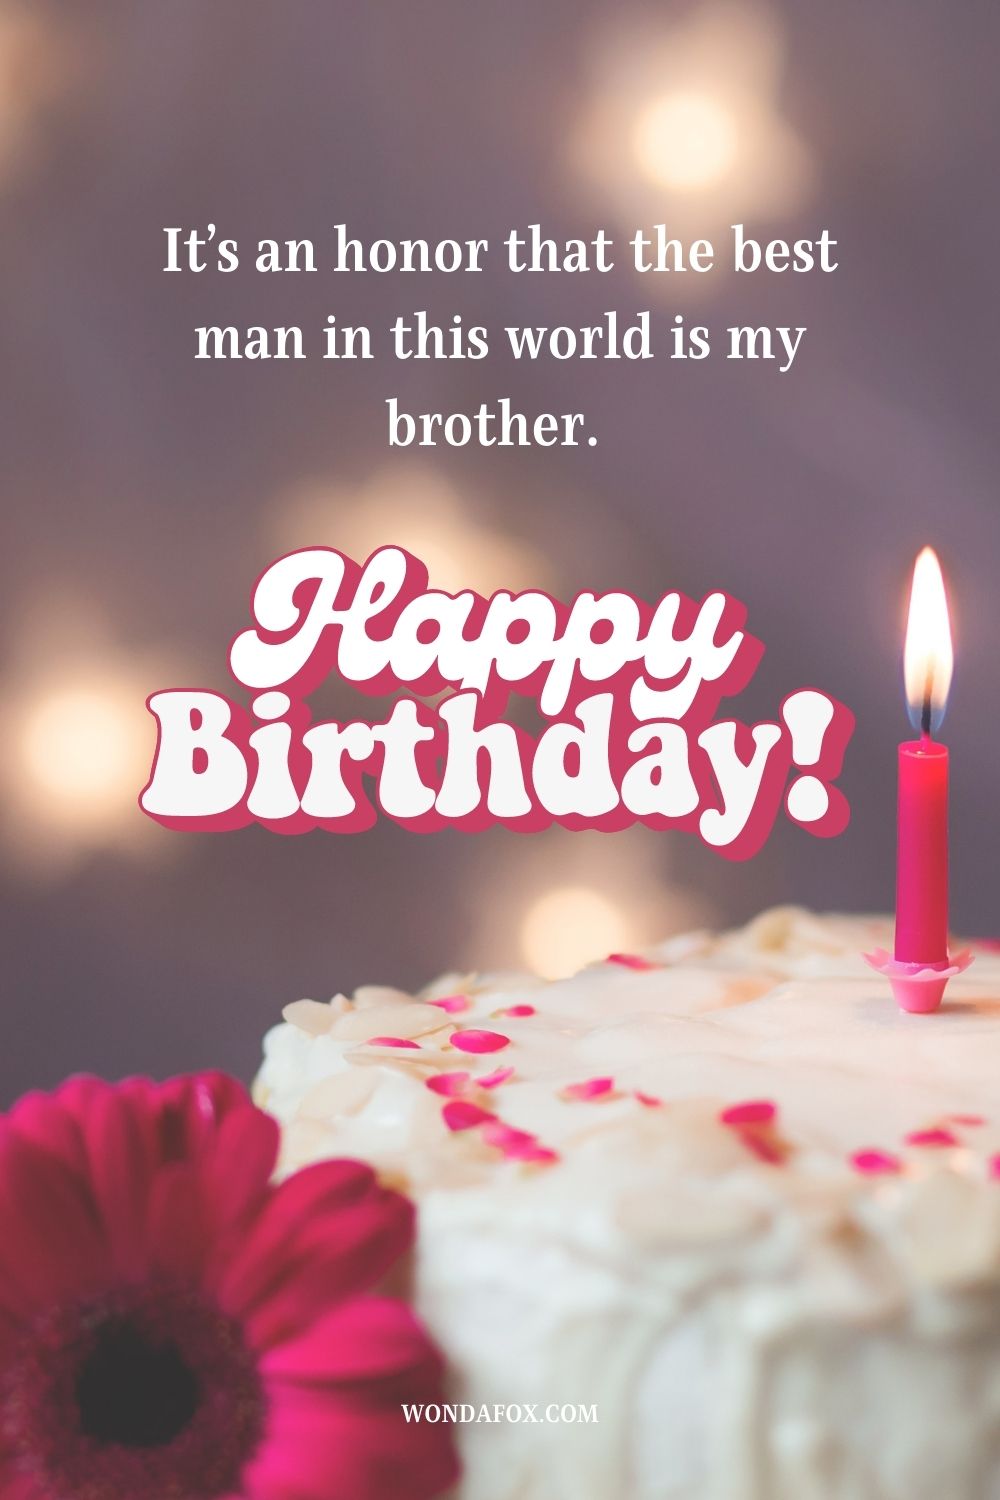 It’s an honor that the best man in this world is my brother. Happy birthday.